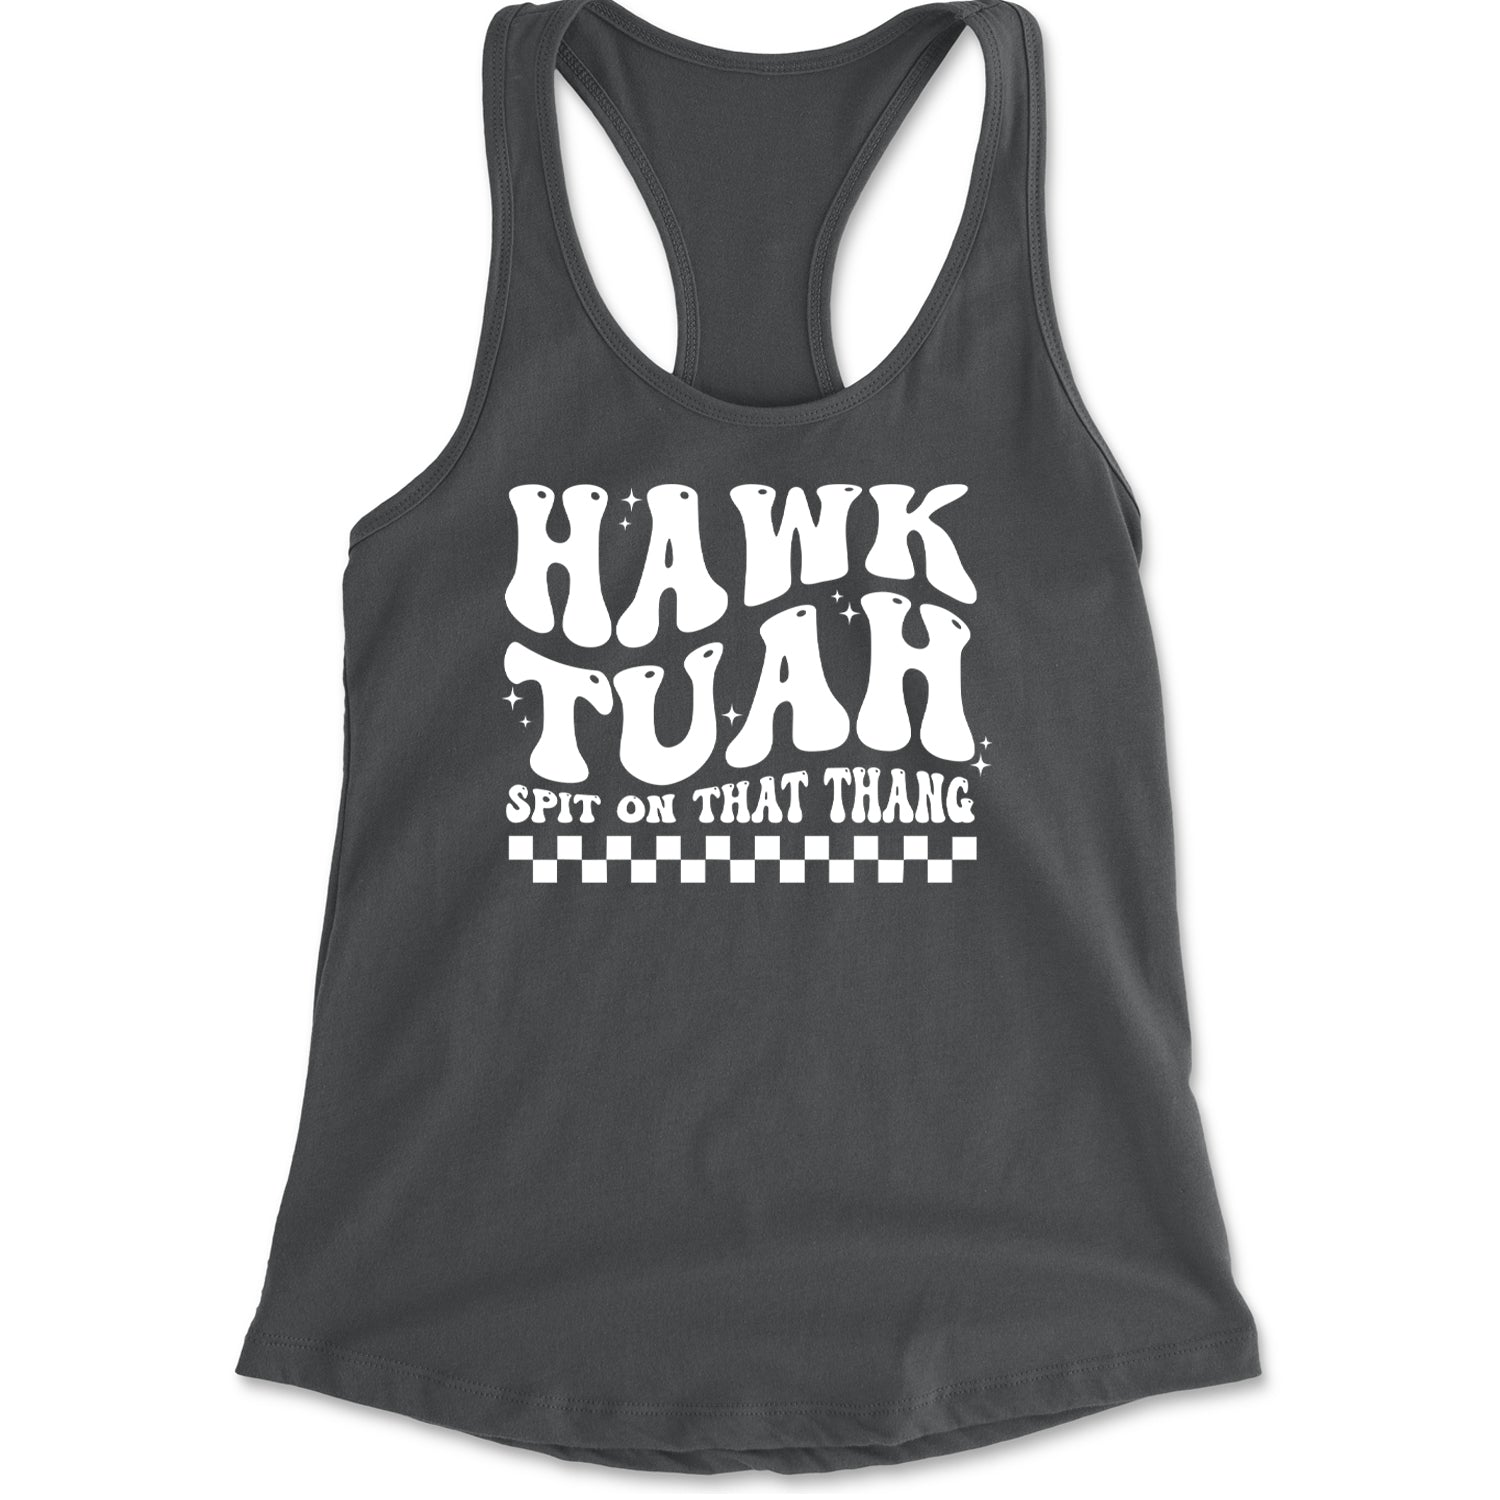 Hawk Tuah Spit On That Thang Racerback Tank Top for Women Charcoal Grey